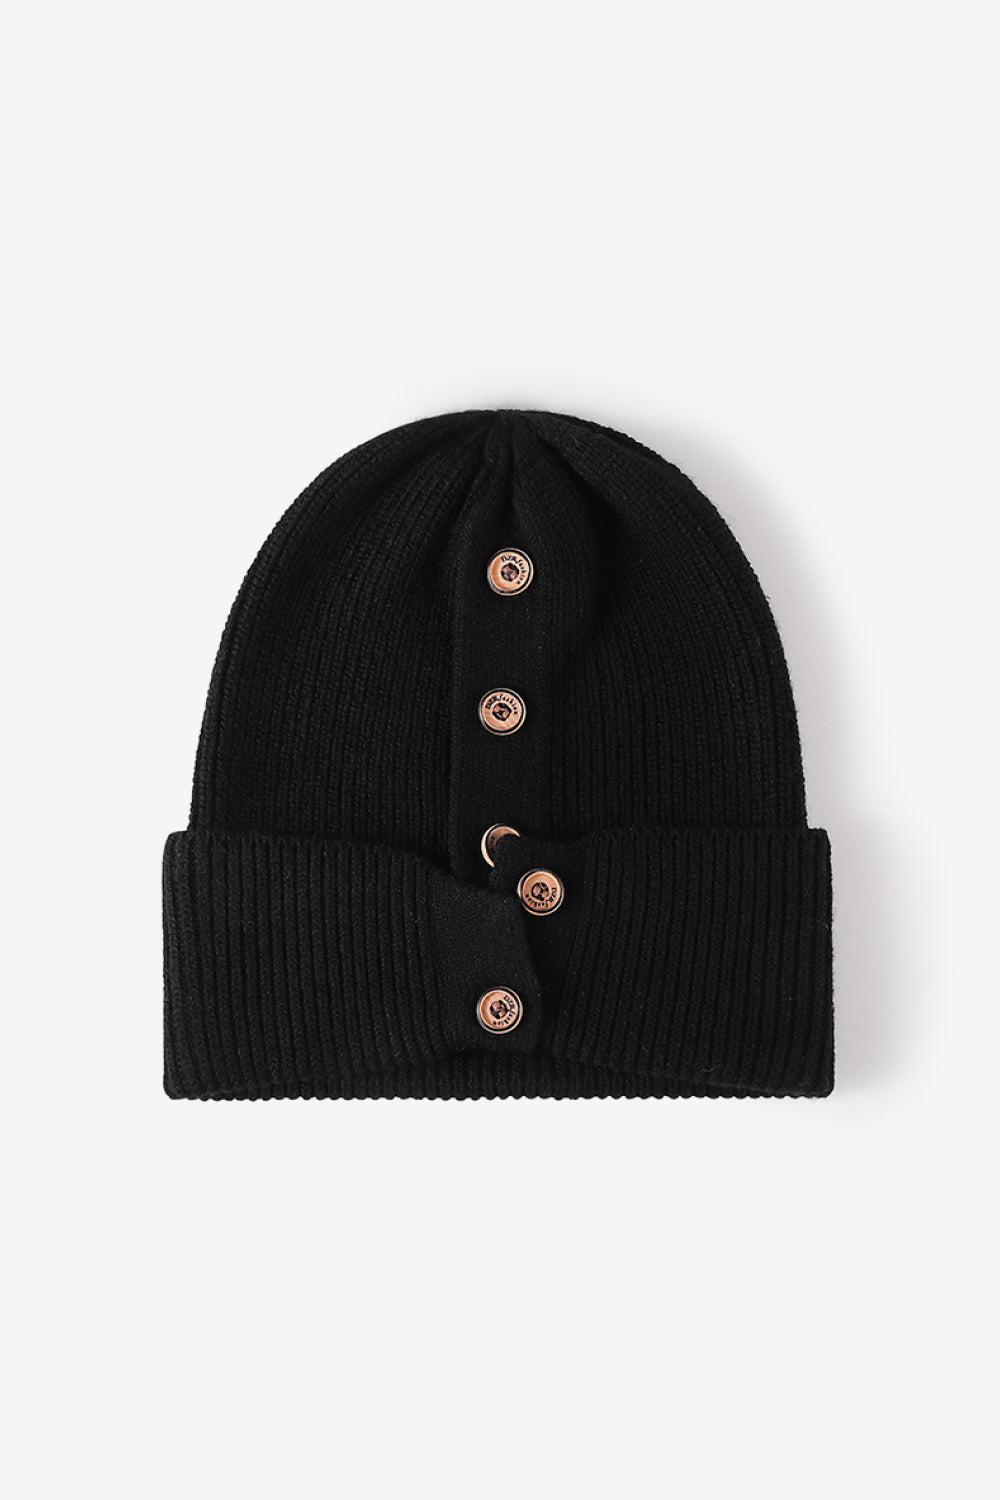 Button Detail Rib-Knit Cuff Beanie-BEANIES-[Adult]-[Female]-Black-One Size-2022 Online Blue Zone Planet